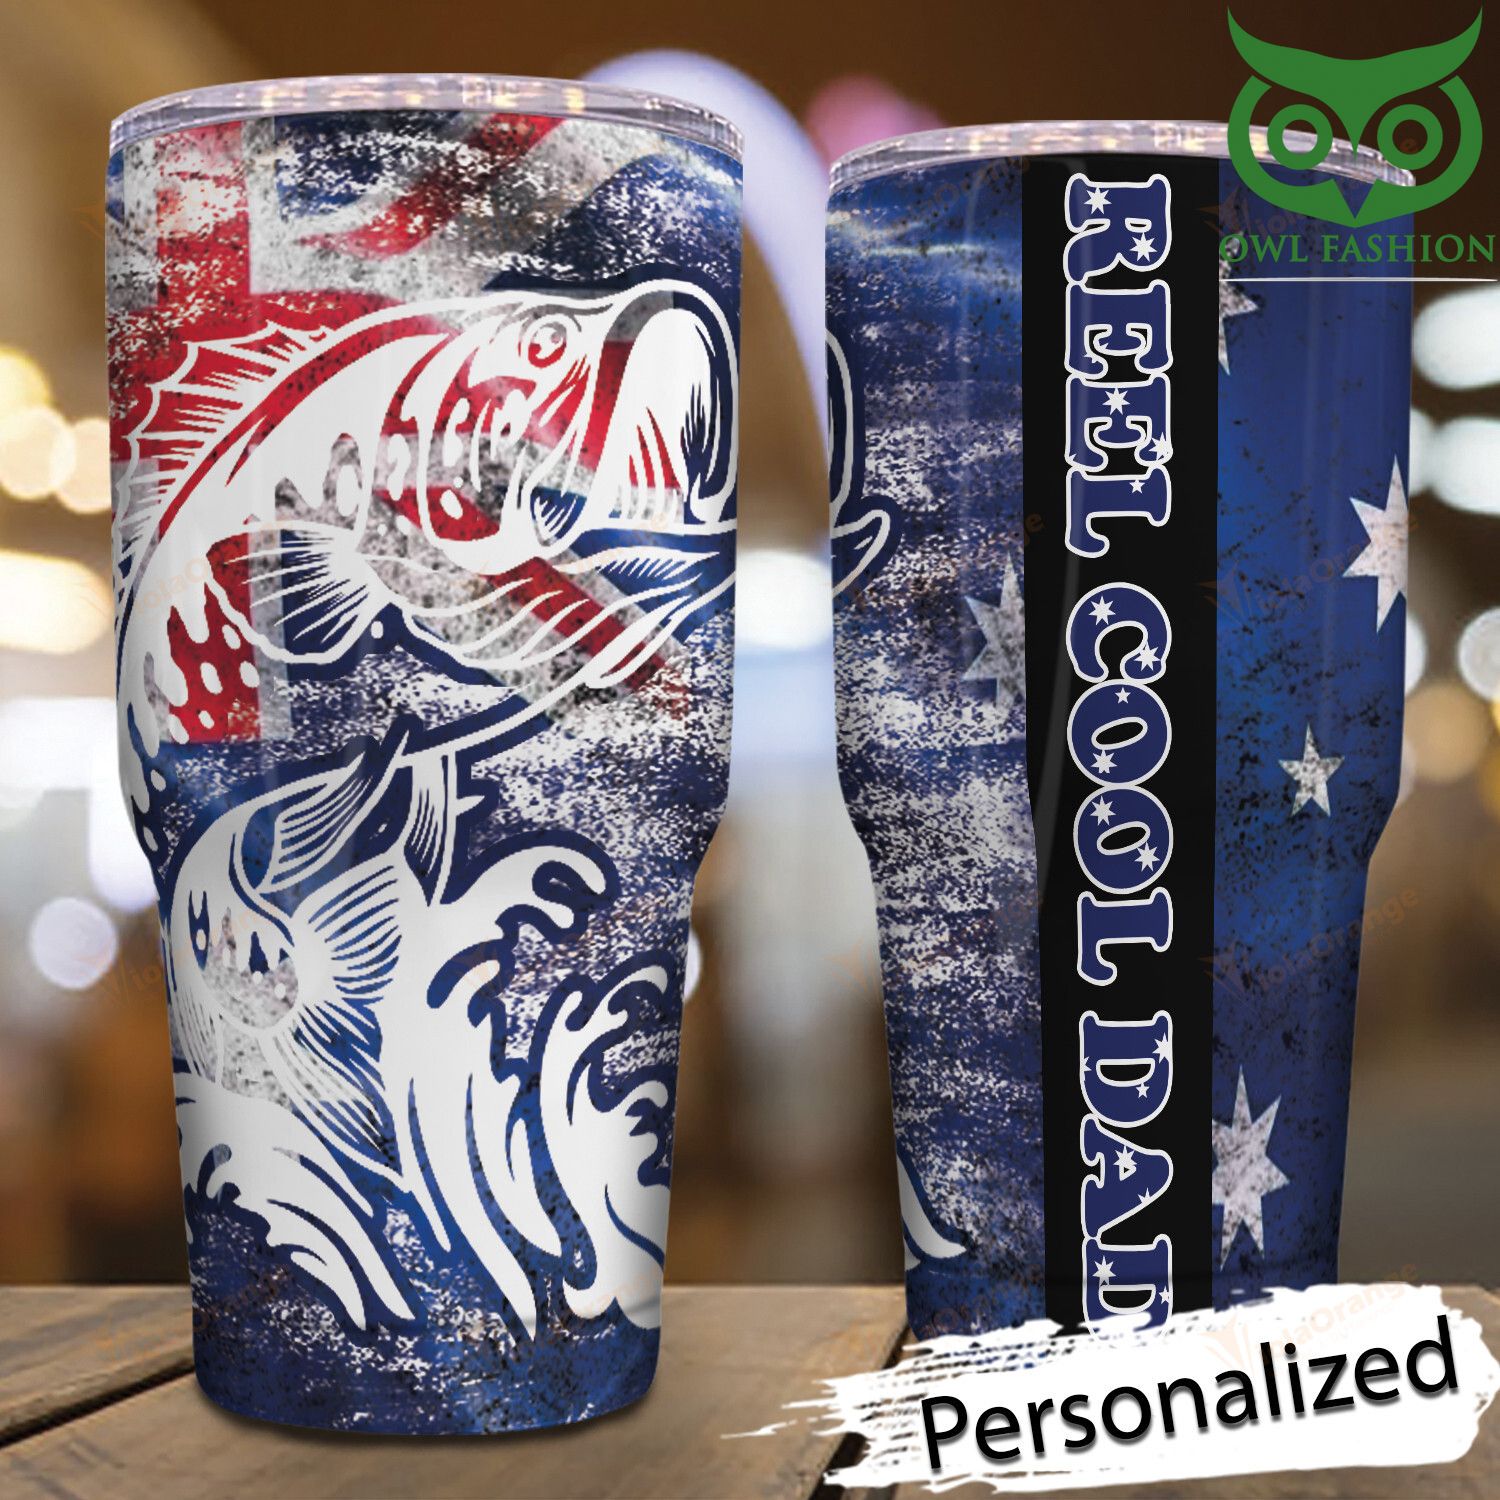 35 Personalized Aus Fishing stainless steel tumbler cup